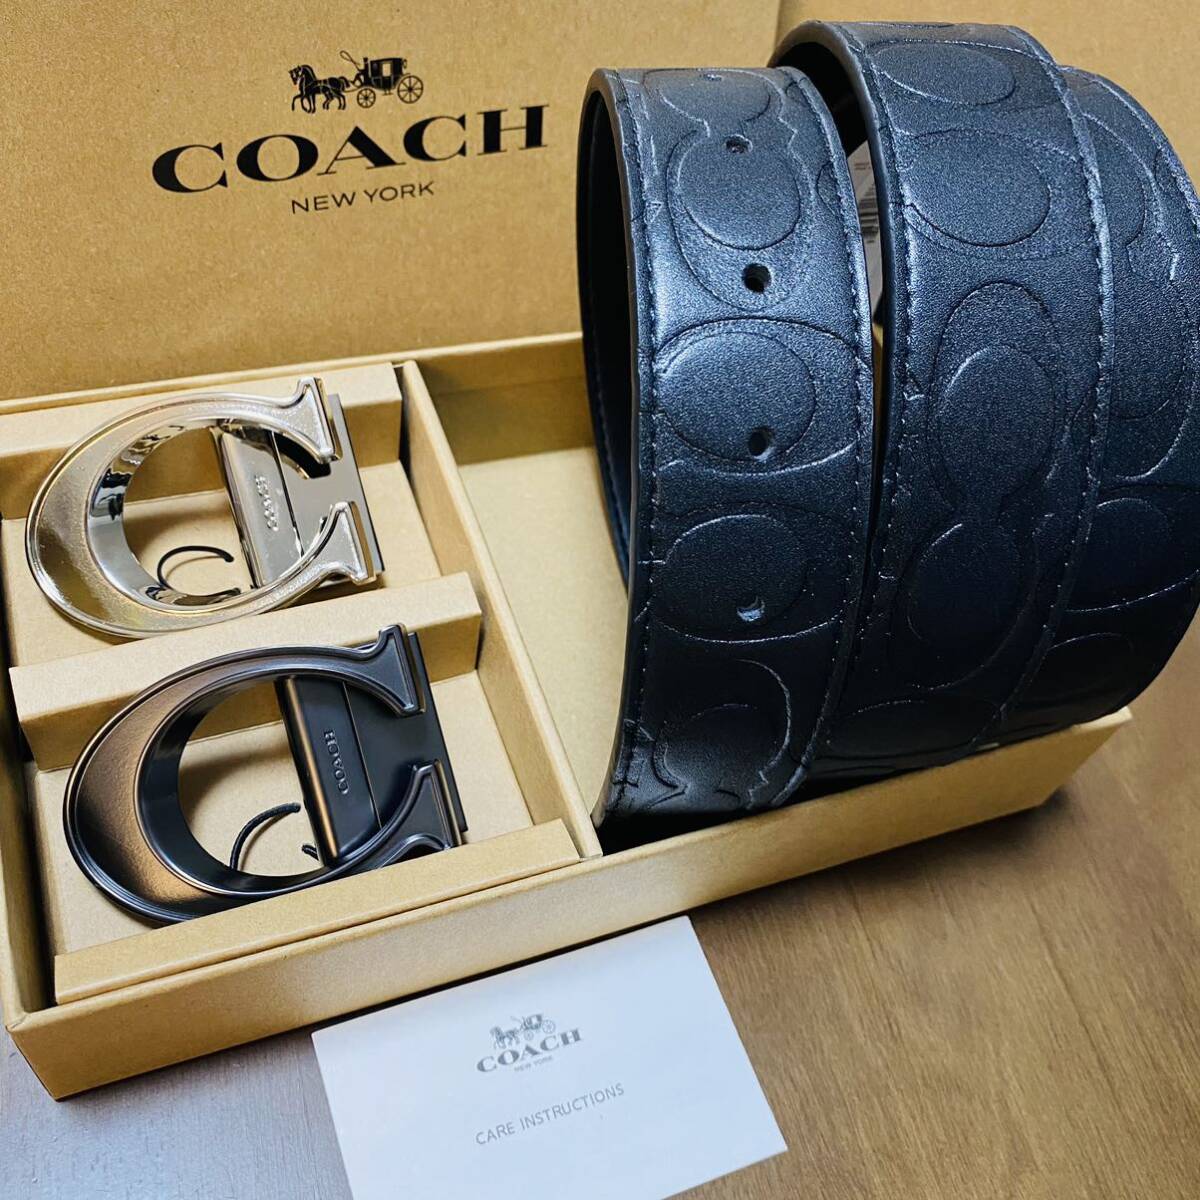 COACH Coach new goods regular goods reversible leather belt rotation buckle any 2 piece 